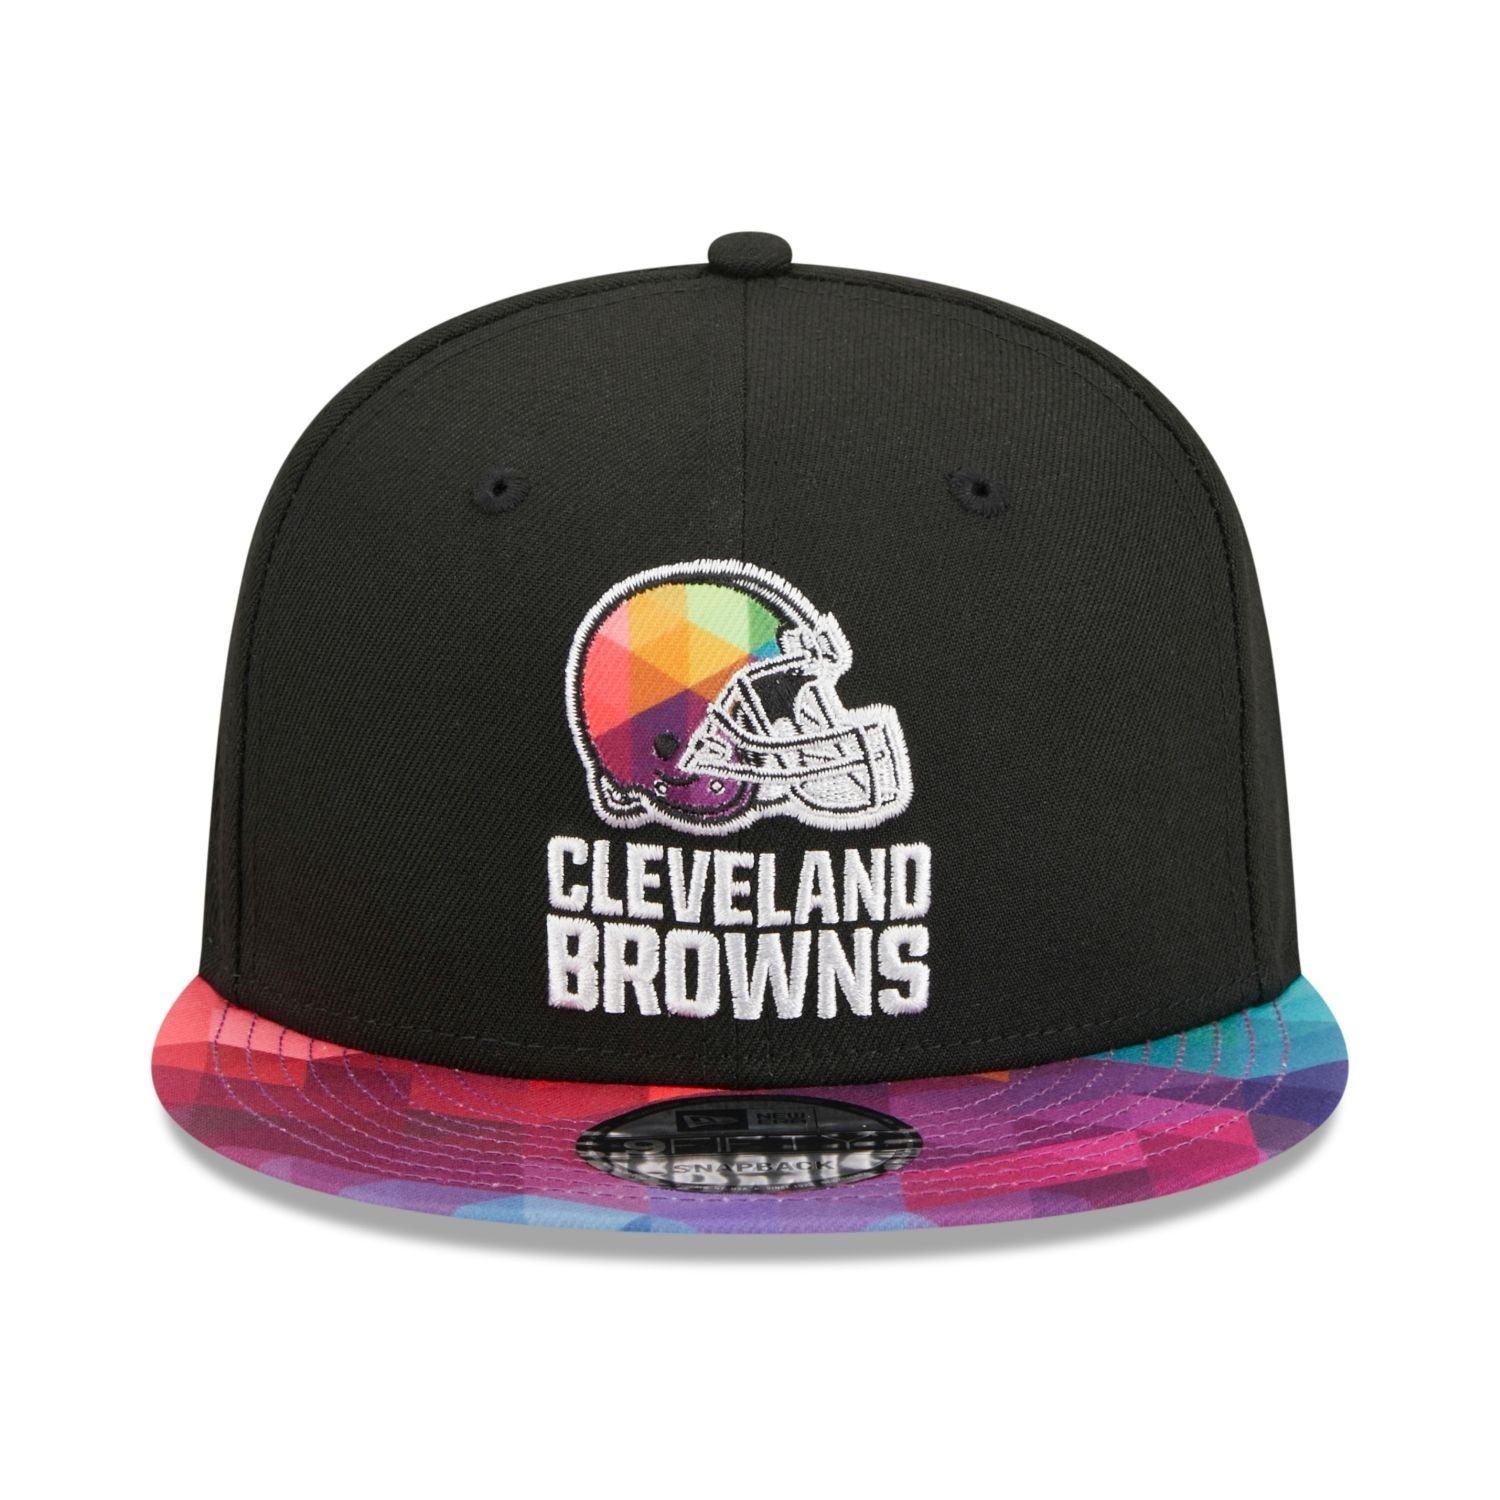 Cleveland Era CRUCIAL Browns NFL Cap Snapback CATCH Teams New 9FIFTY